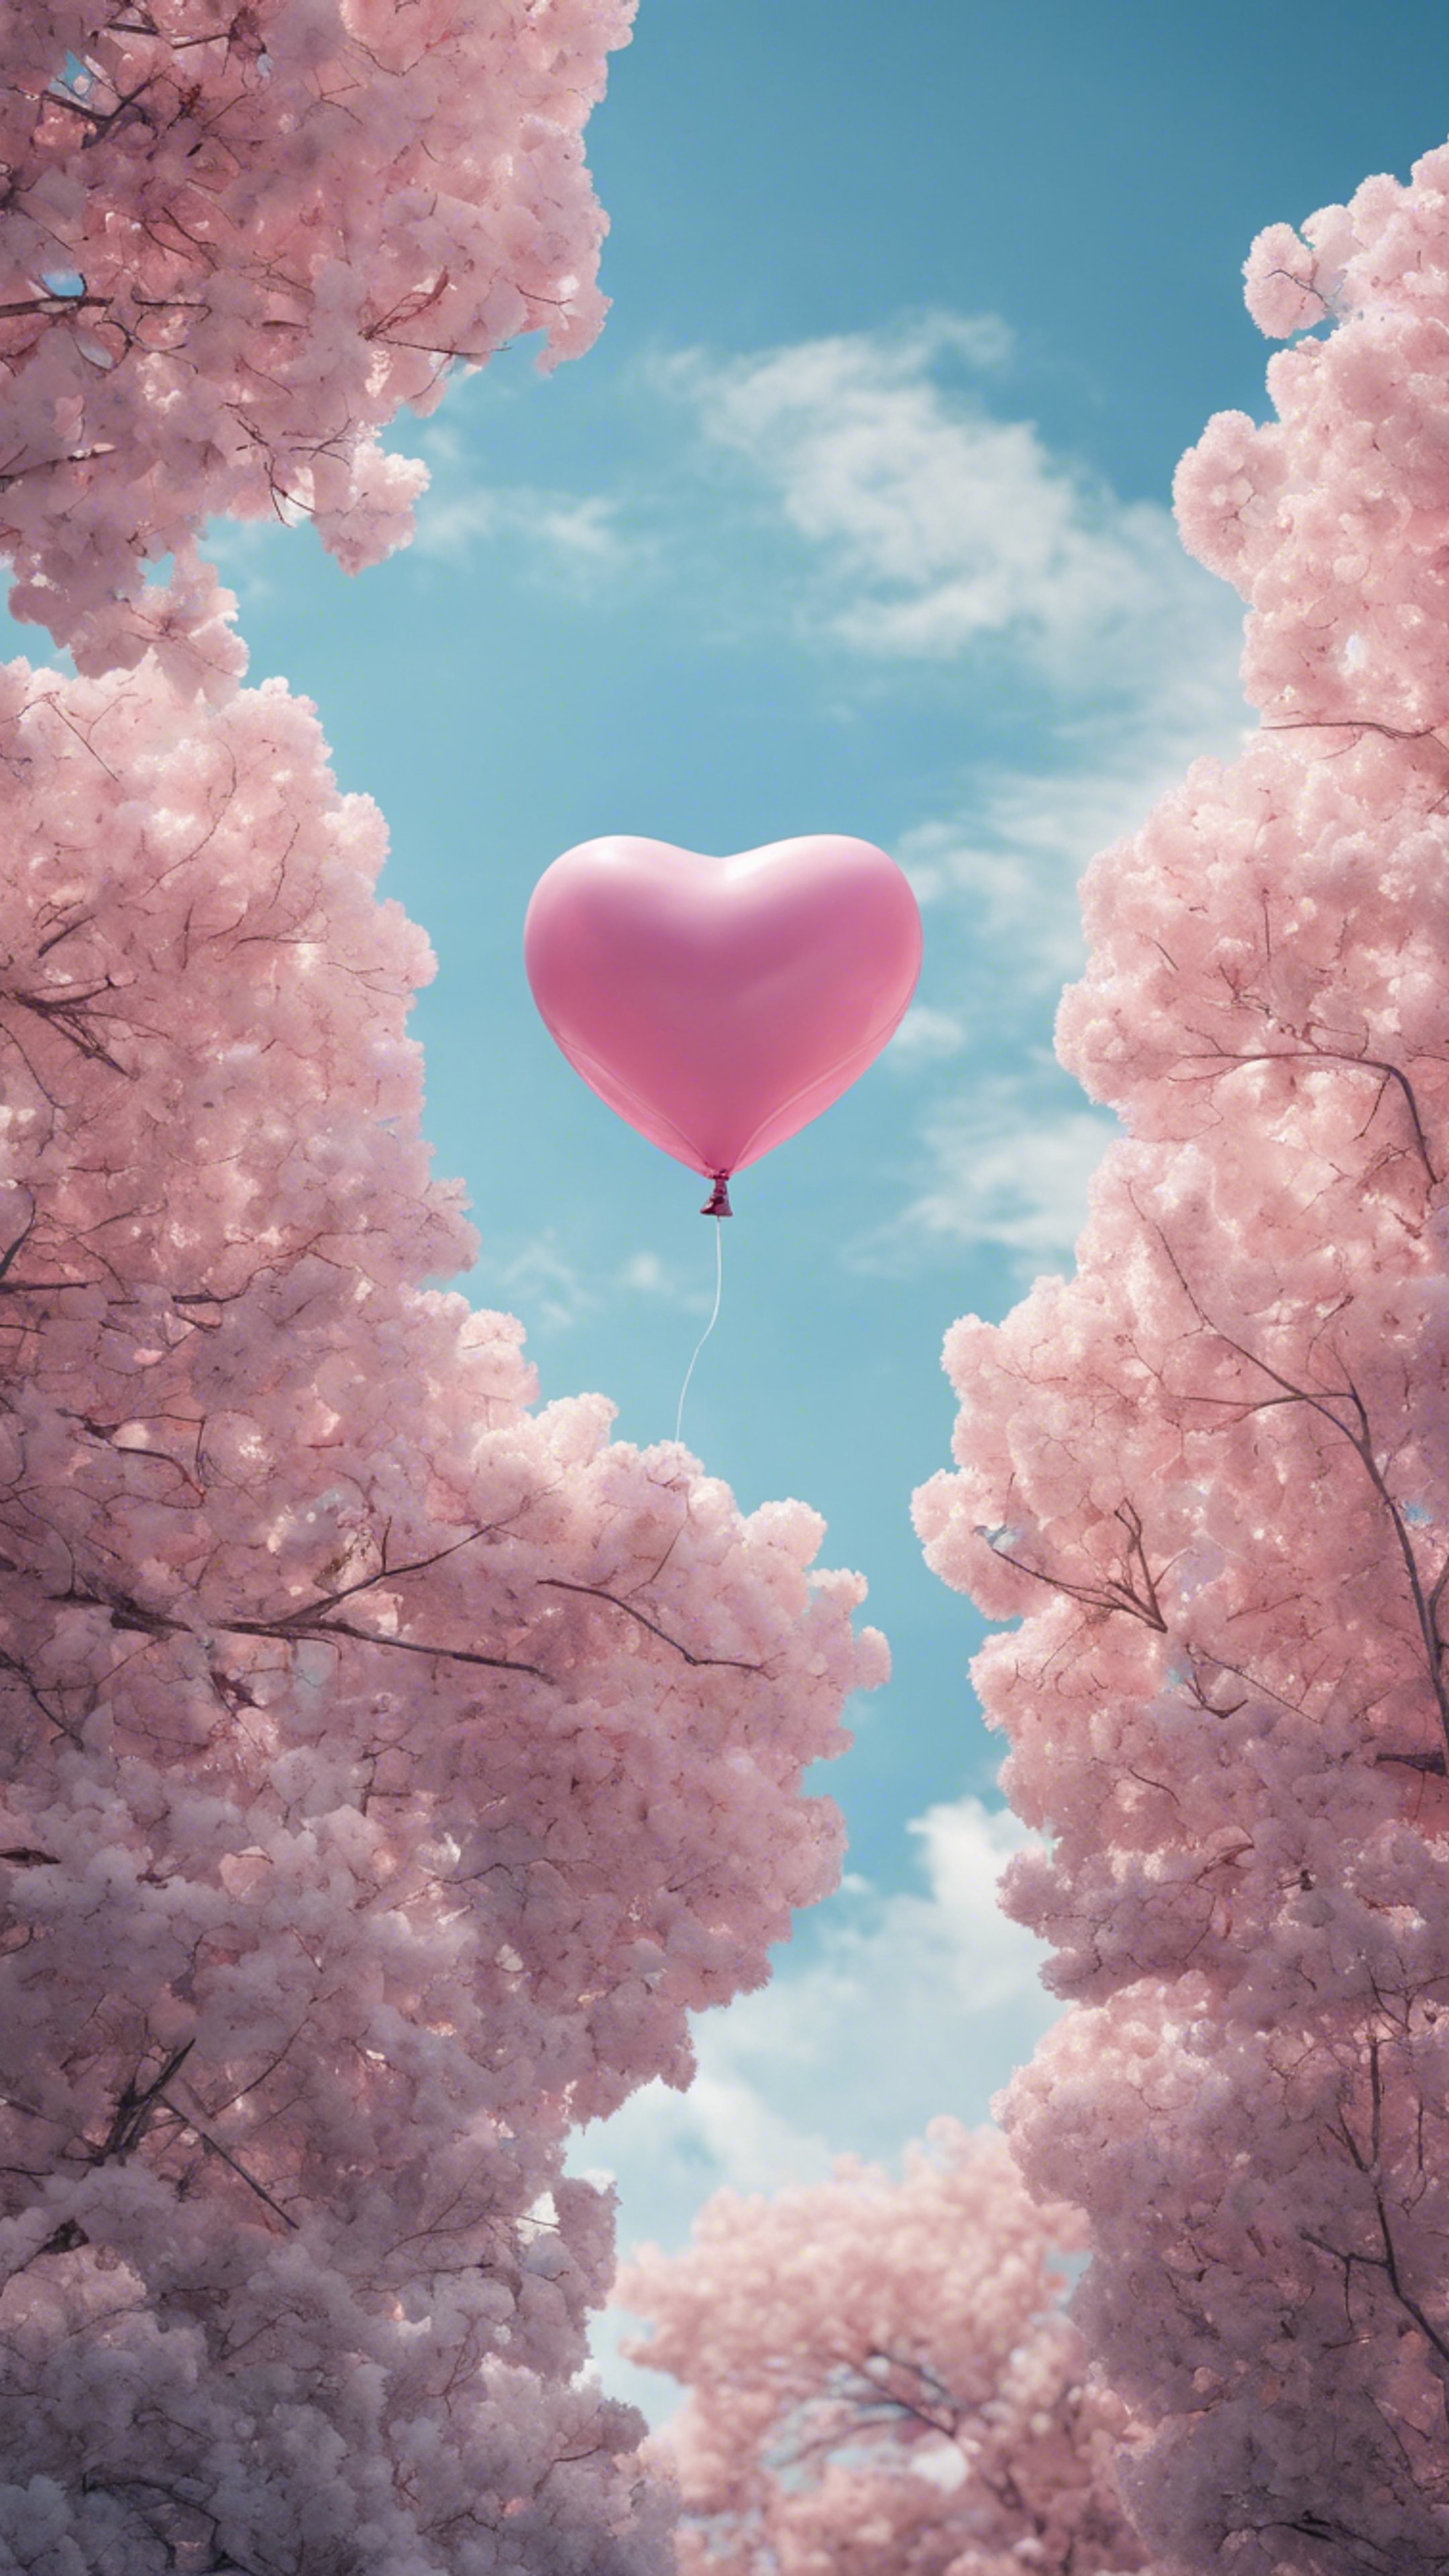 A pink heart-shaped balloon floating in the blue sky. ផ្ទាំង​រូបភាព[cd7c71404dc64bc7bb7c]